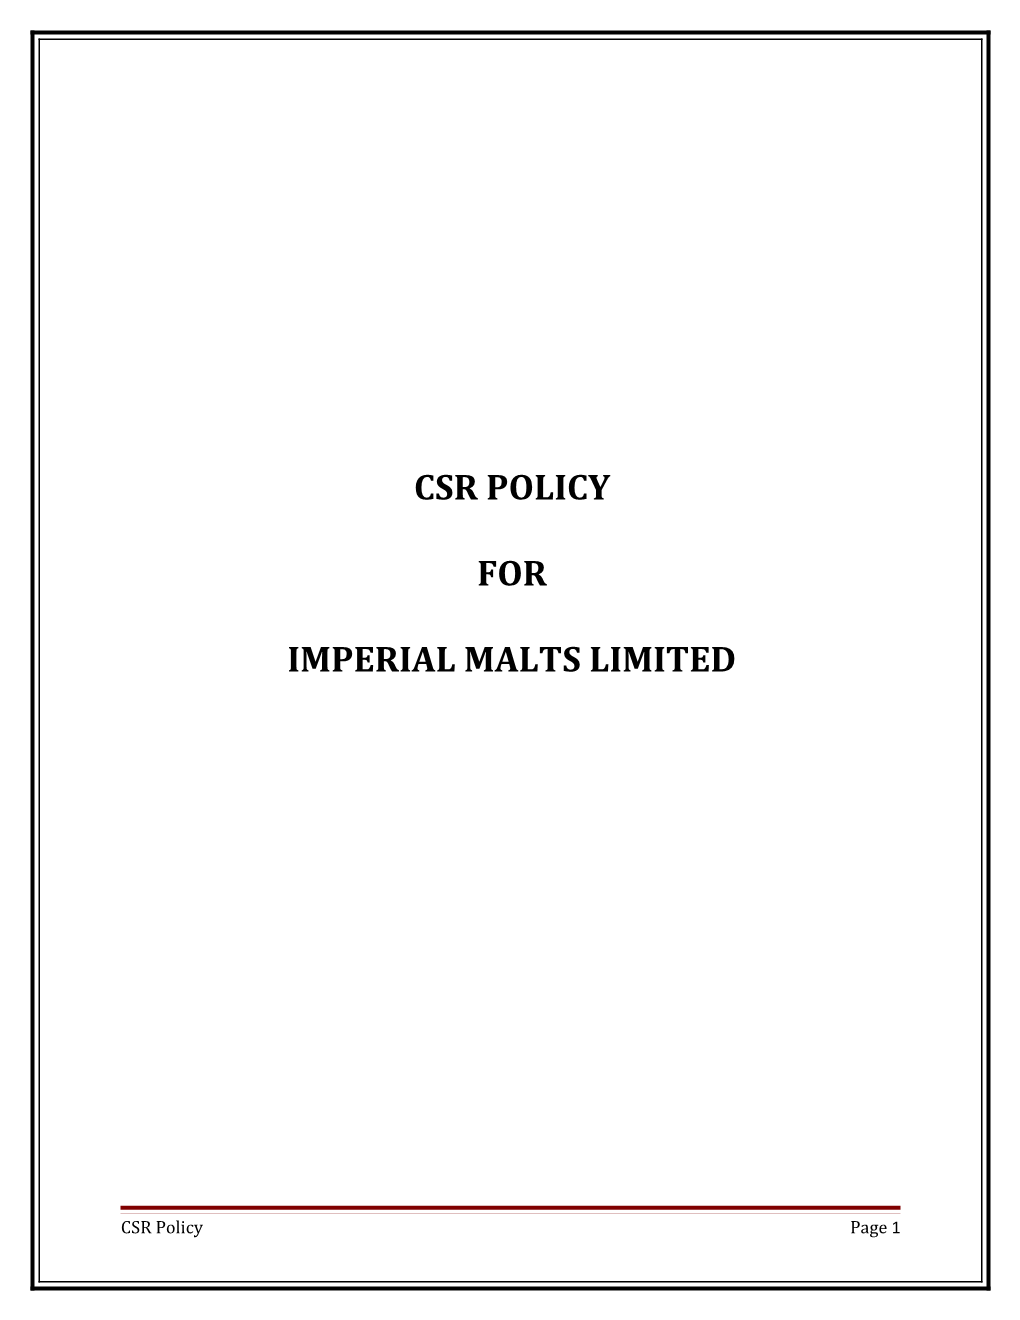 About Imperial Malts Limited (IML)